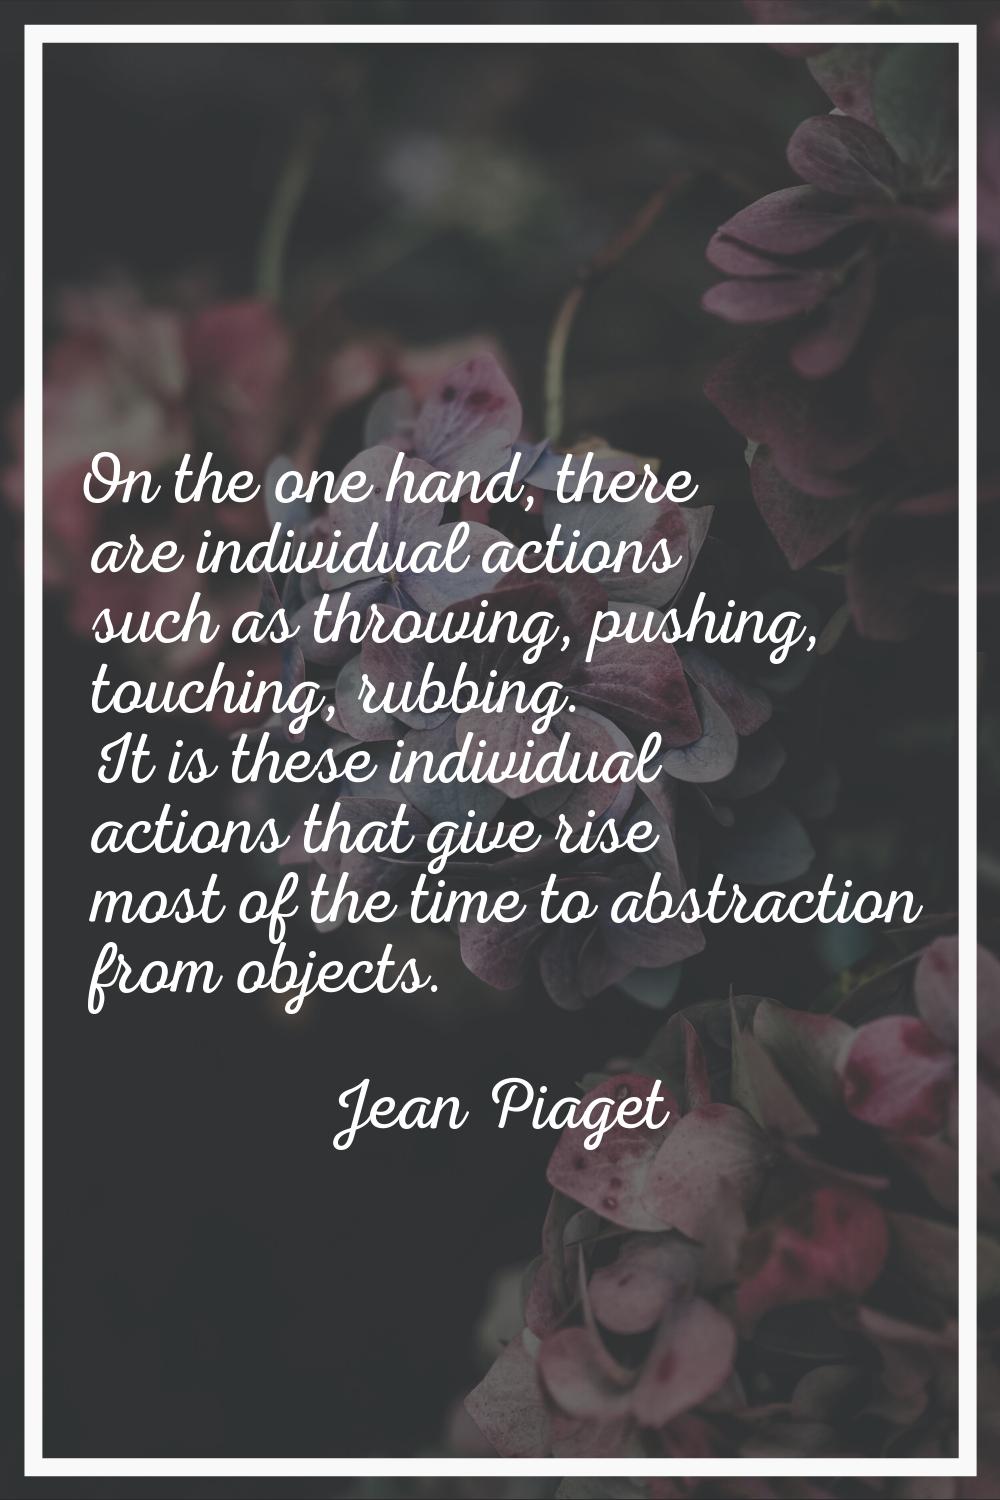 On the one hand, there are individual actions such as throwing, pushing, touching, rubbing. It is t